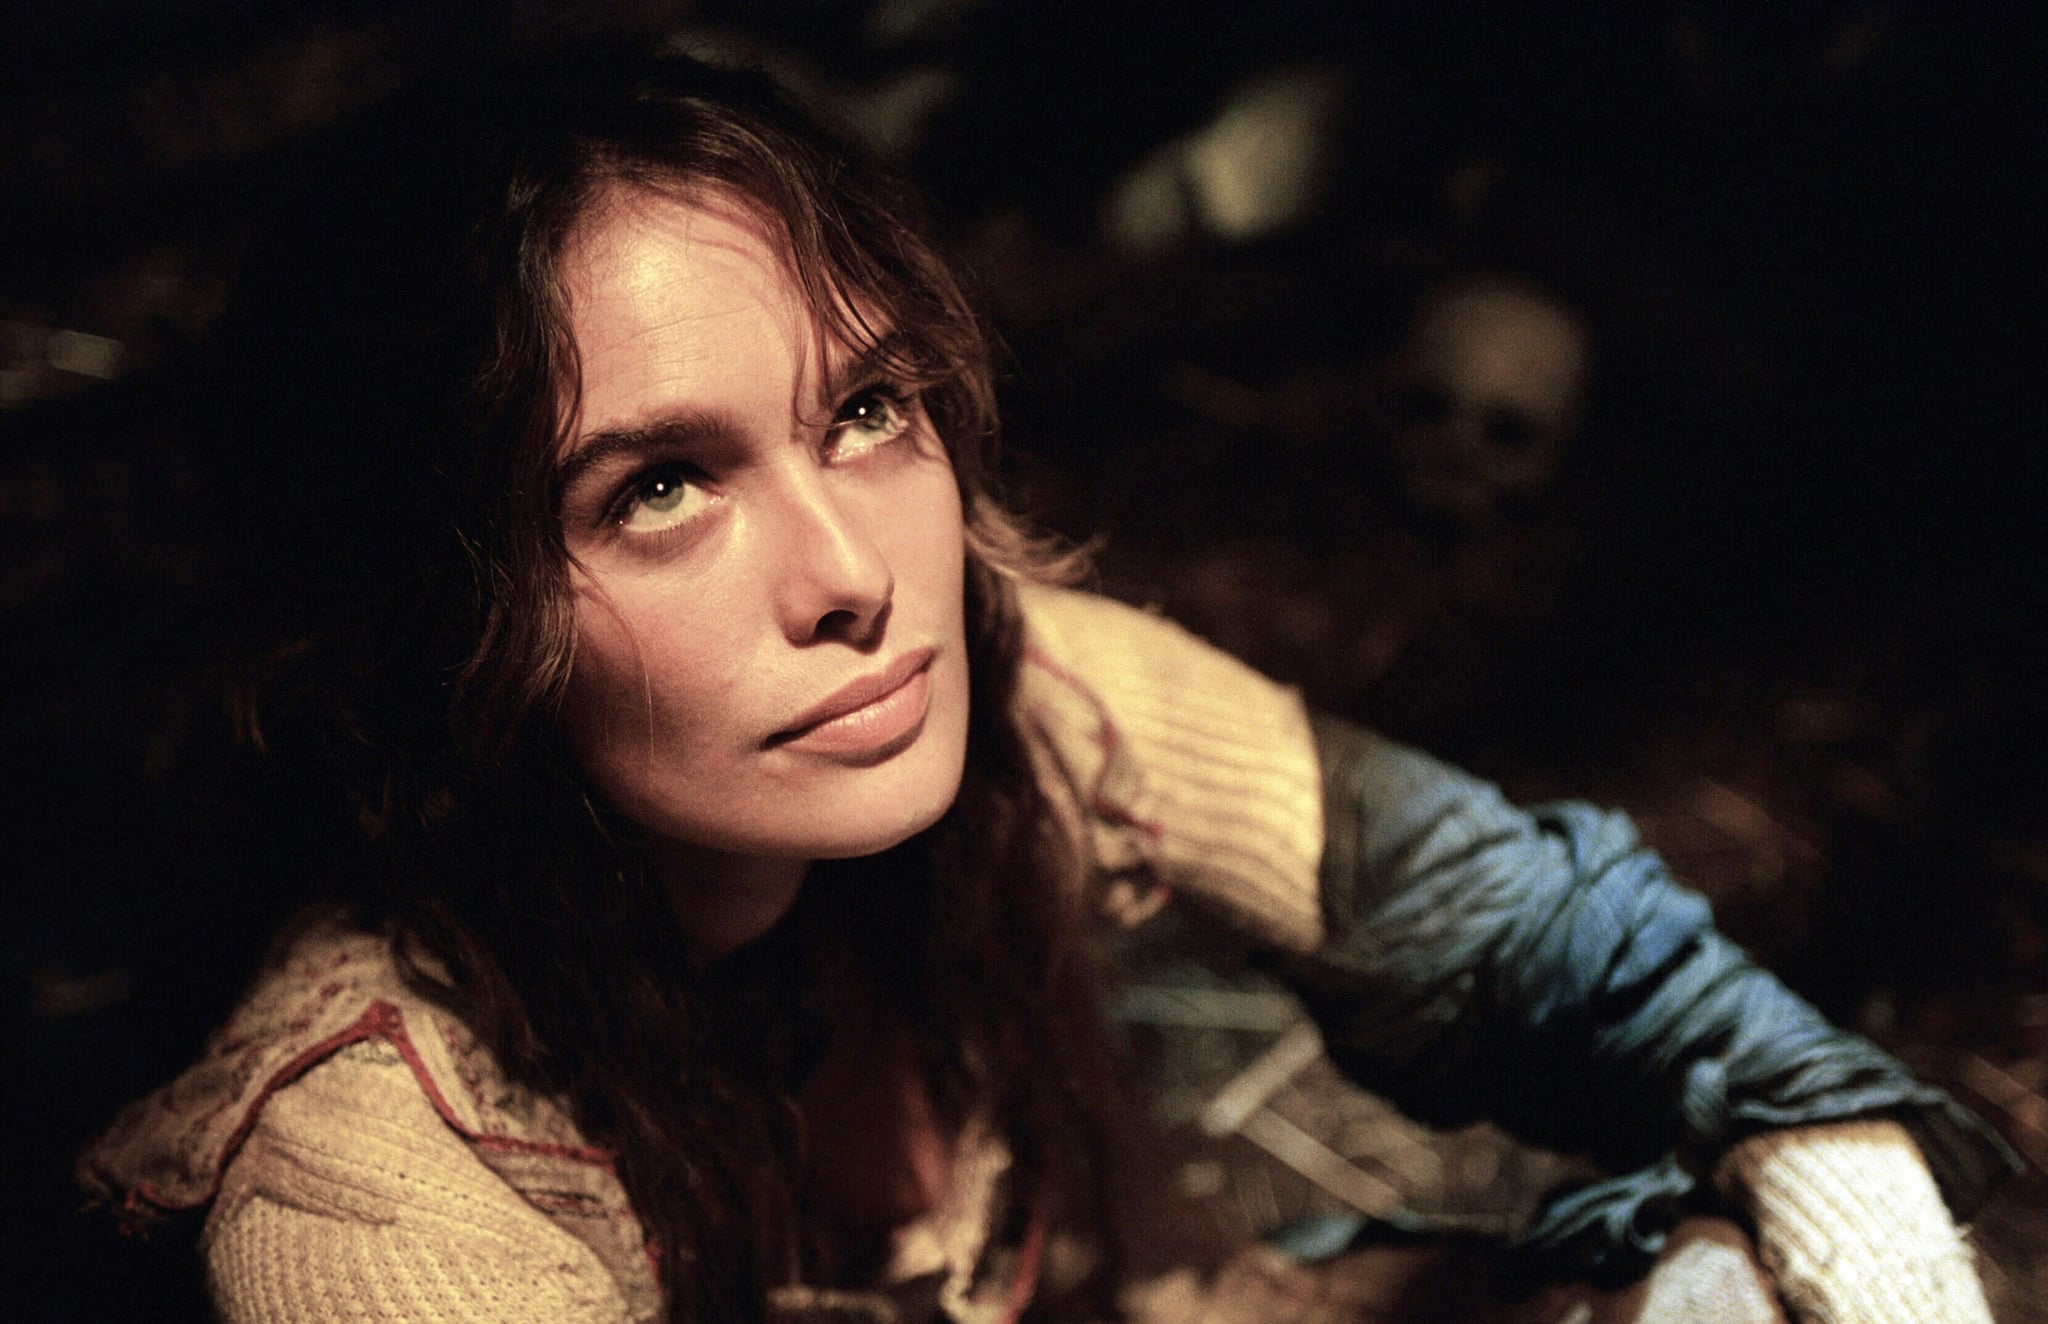 The Brothers Grimm, 2005 | 10 Places You've Seen Game of Thrones's Lena Headey Before | POPSUGAR Entertainment Photo 4